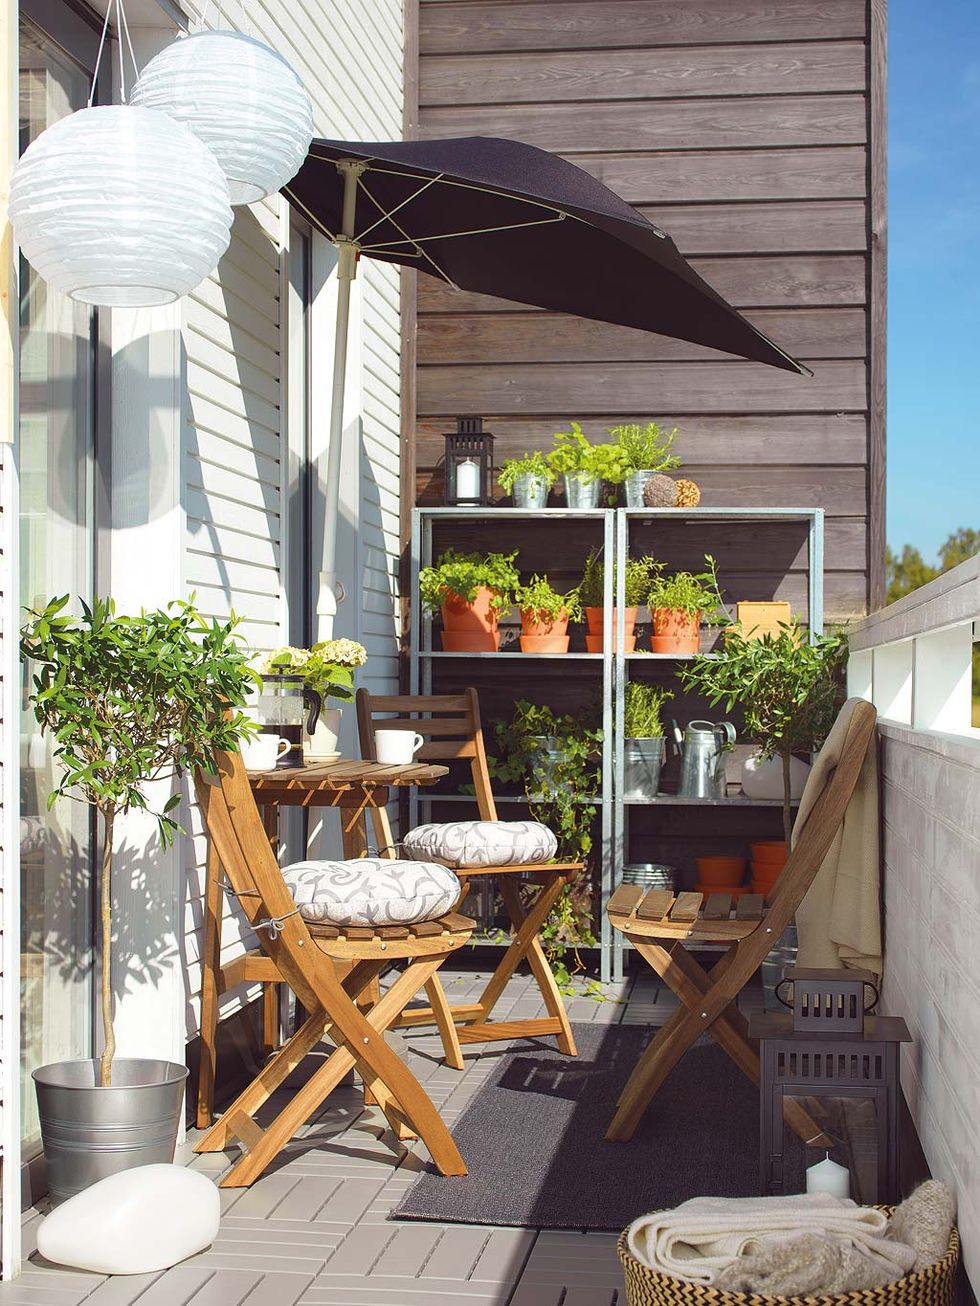 12 Great Ideas for Creating Nice Looking Shed in the Garden